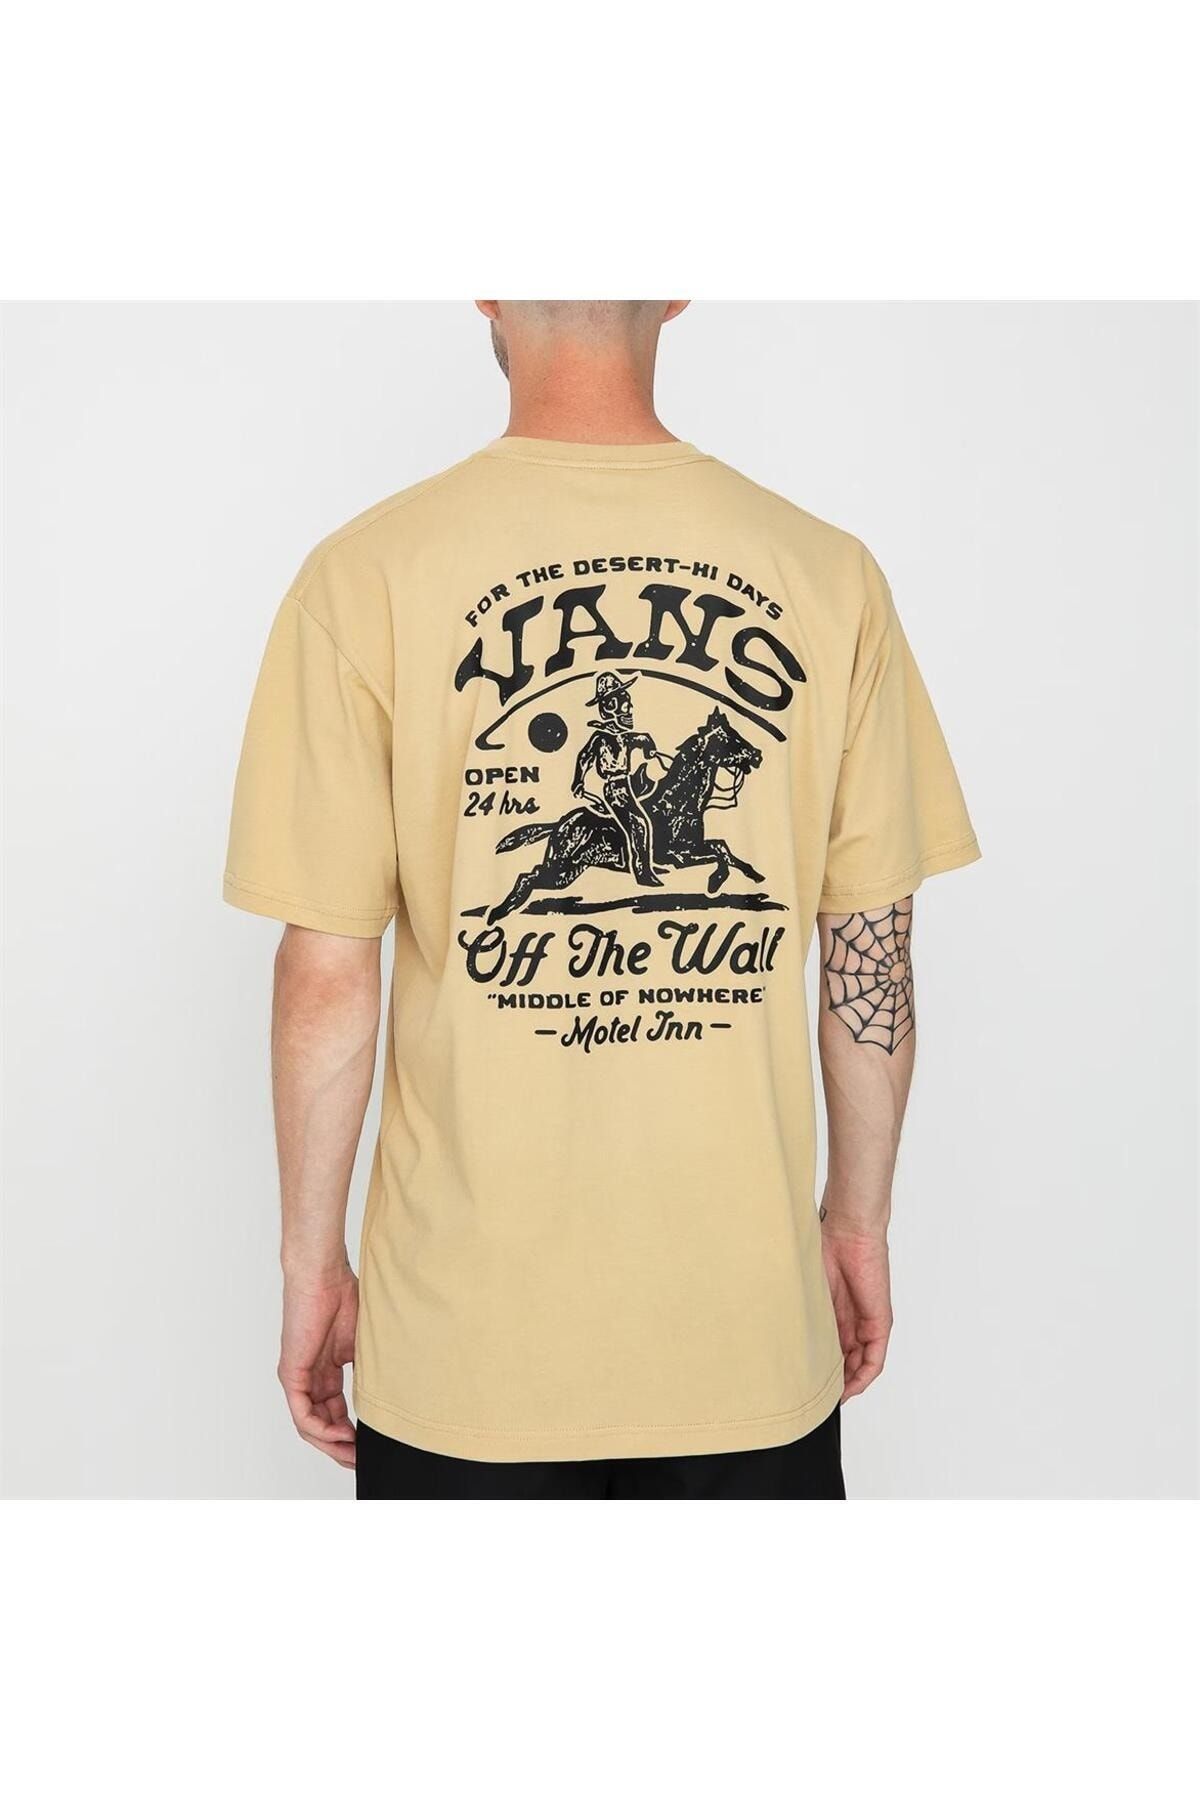 Vans Middle Of Nowhere T-Shirt